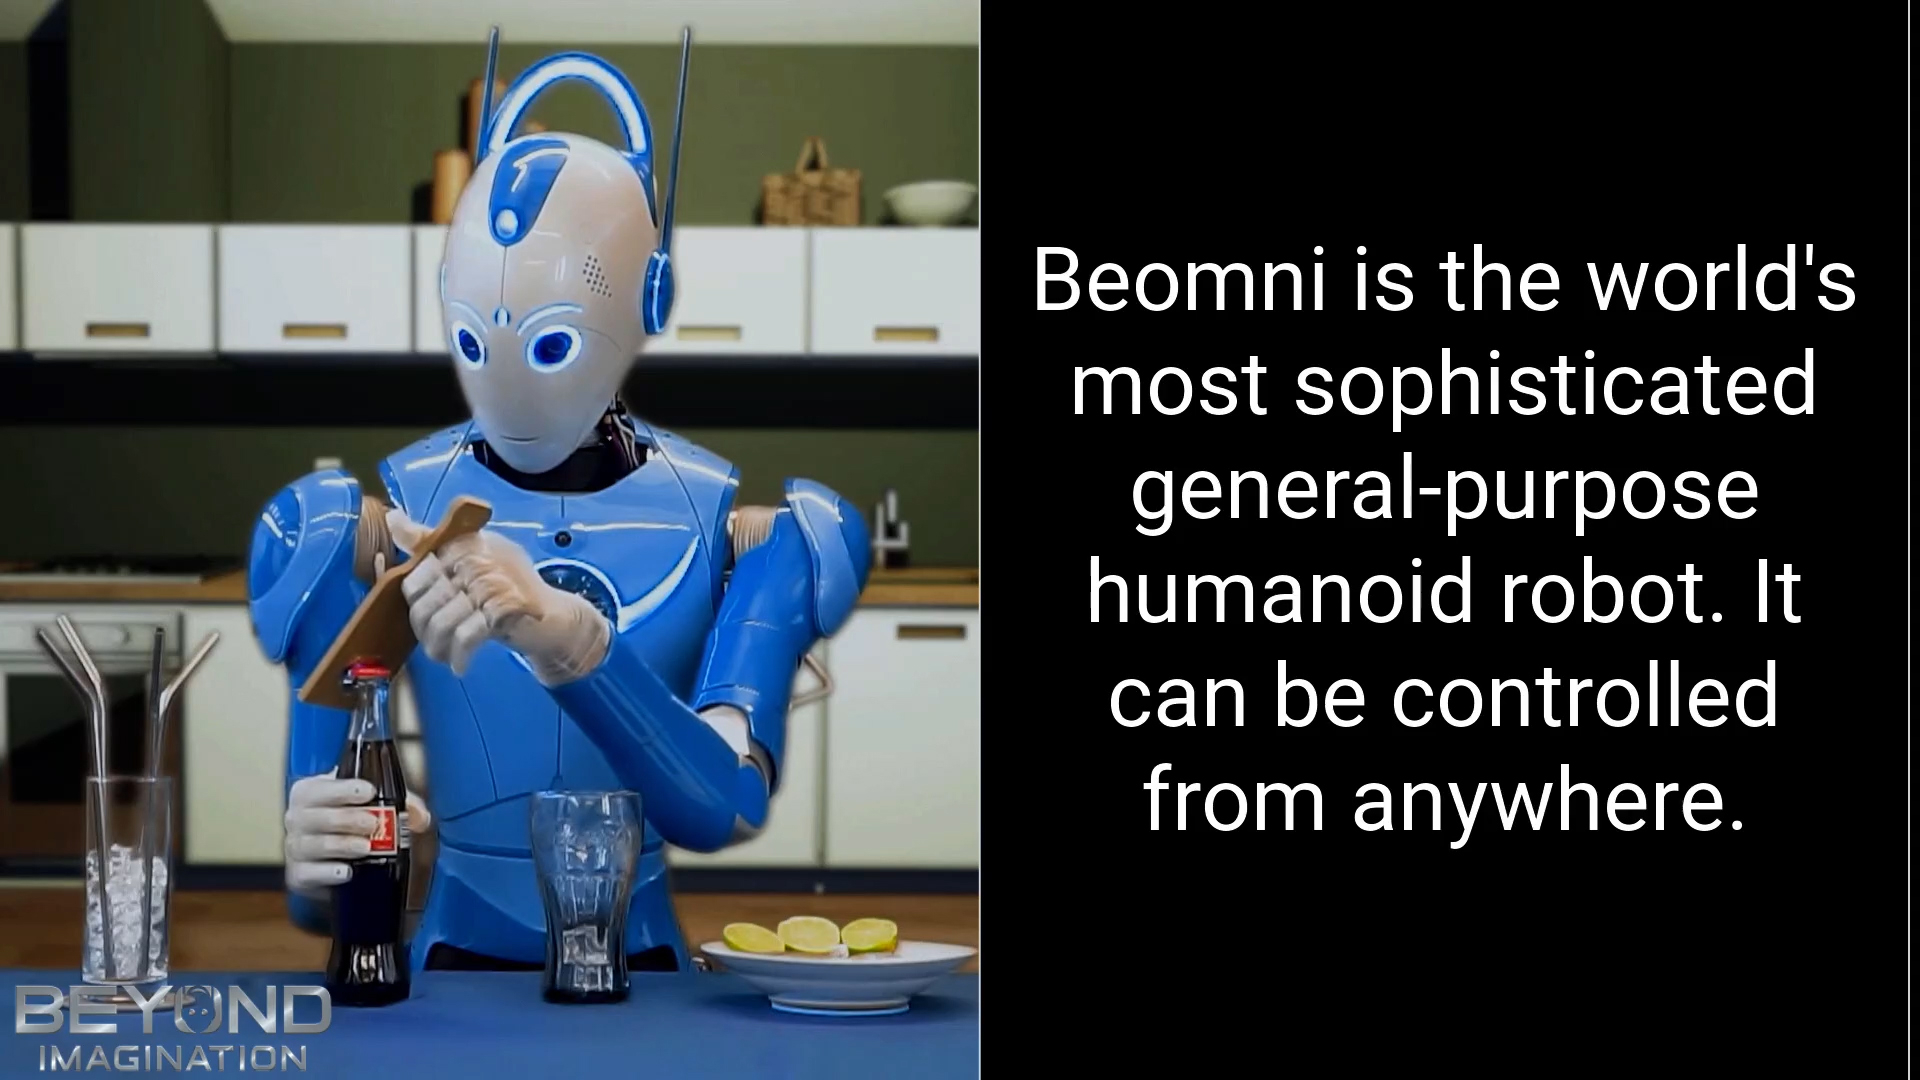 Beomni is the world’s most sophisticated general-purpose humanoid robot, capable of performing an almost unlimited number of tasks. The robot is on display at the Explorers Club Headquarters this week in NYC and on Friday it will be serving guests at the Explorers Club Annual Dinner.